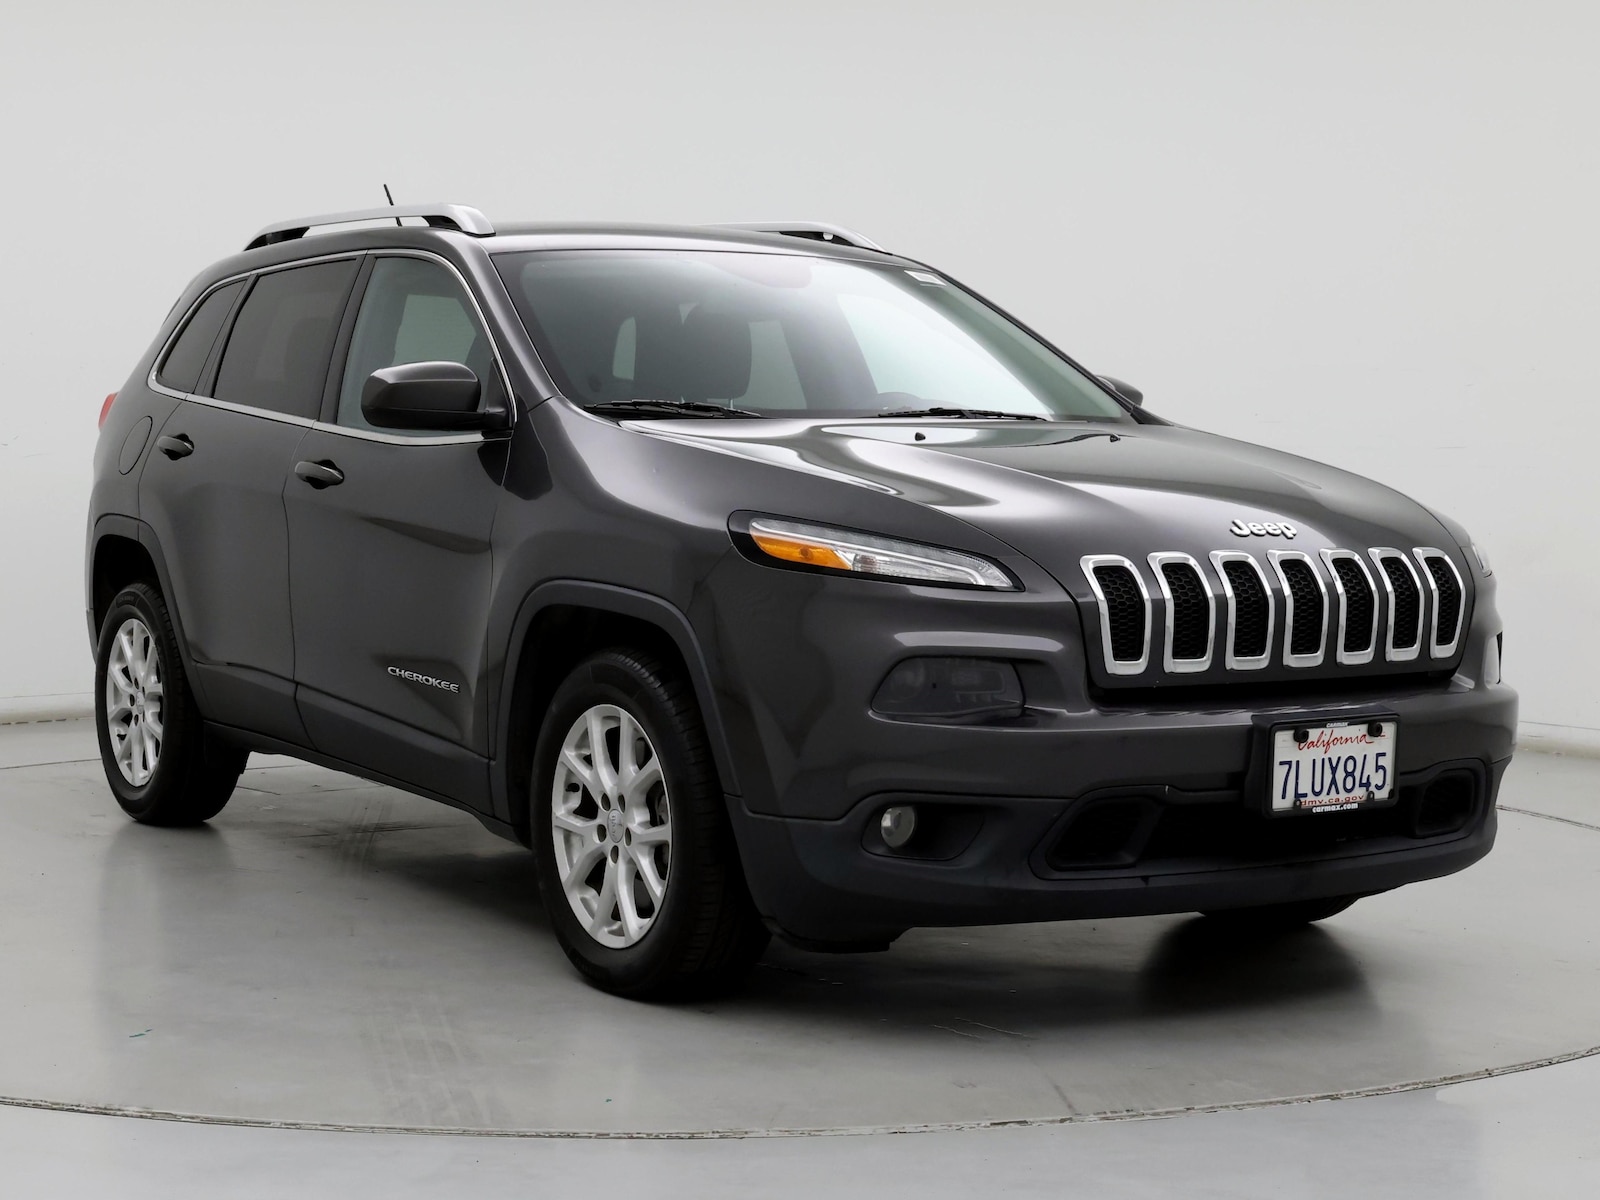 Used 2015 Jeep Cherokee Latitude with VIN 1C4PJLCB4FW790760 for sale in Spokane Valley, WA